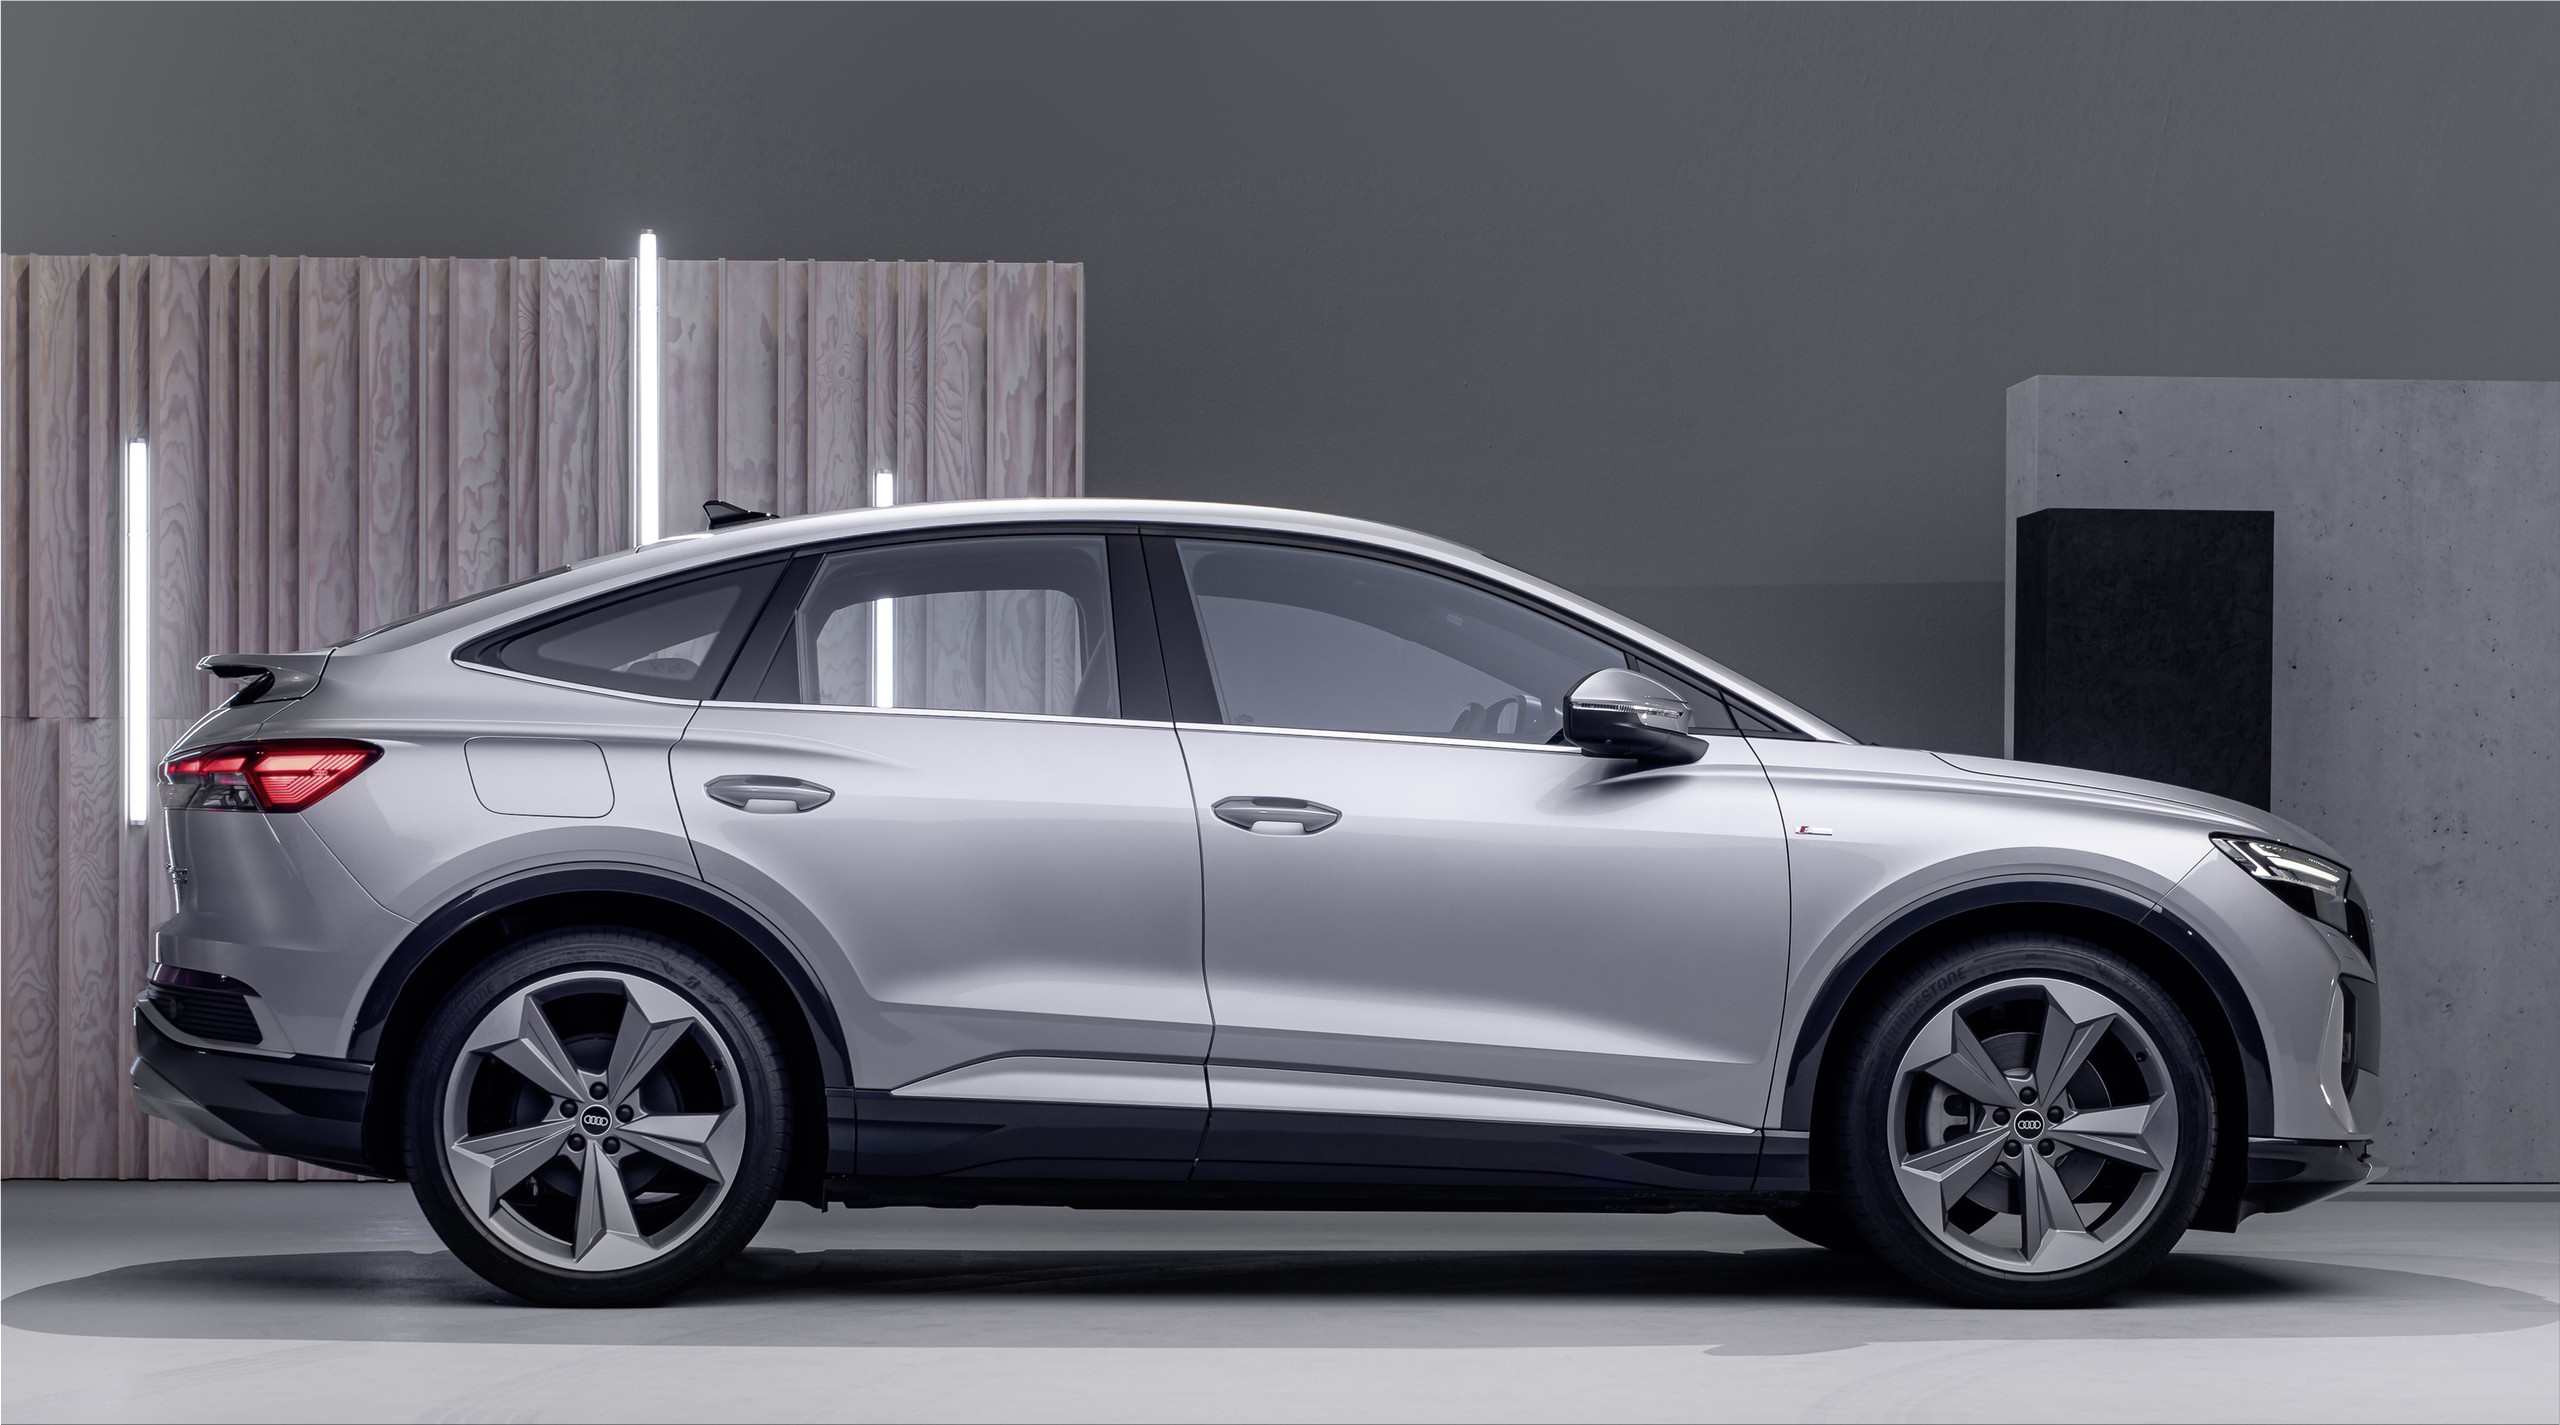 The new Audi Q4 e-tron fully electric SUV: official images and info